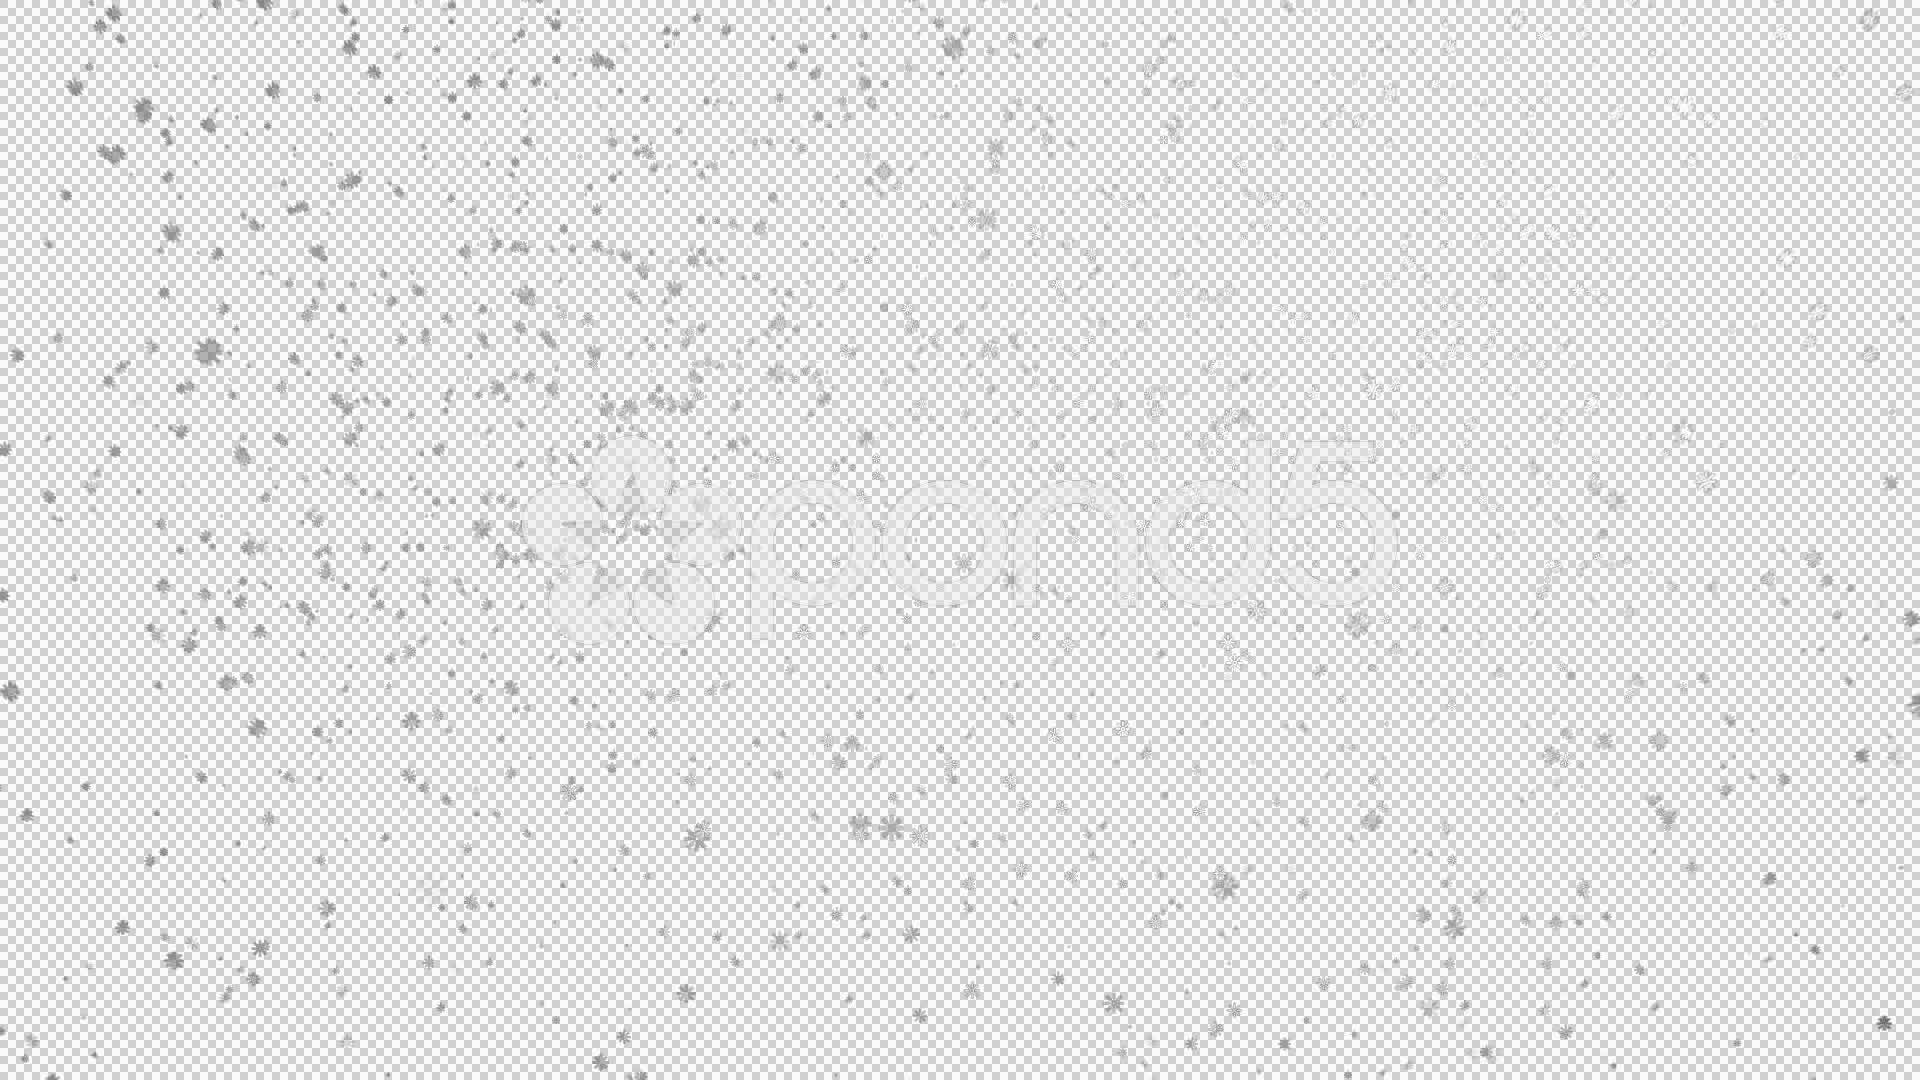 Free Snow Transparent Png, Download Free Clip Art, Free Clip Art on